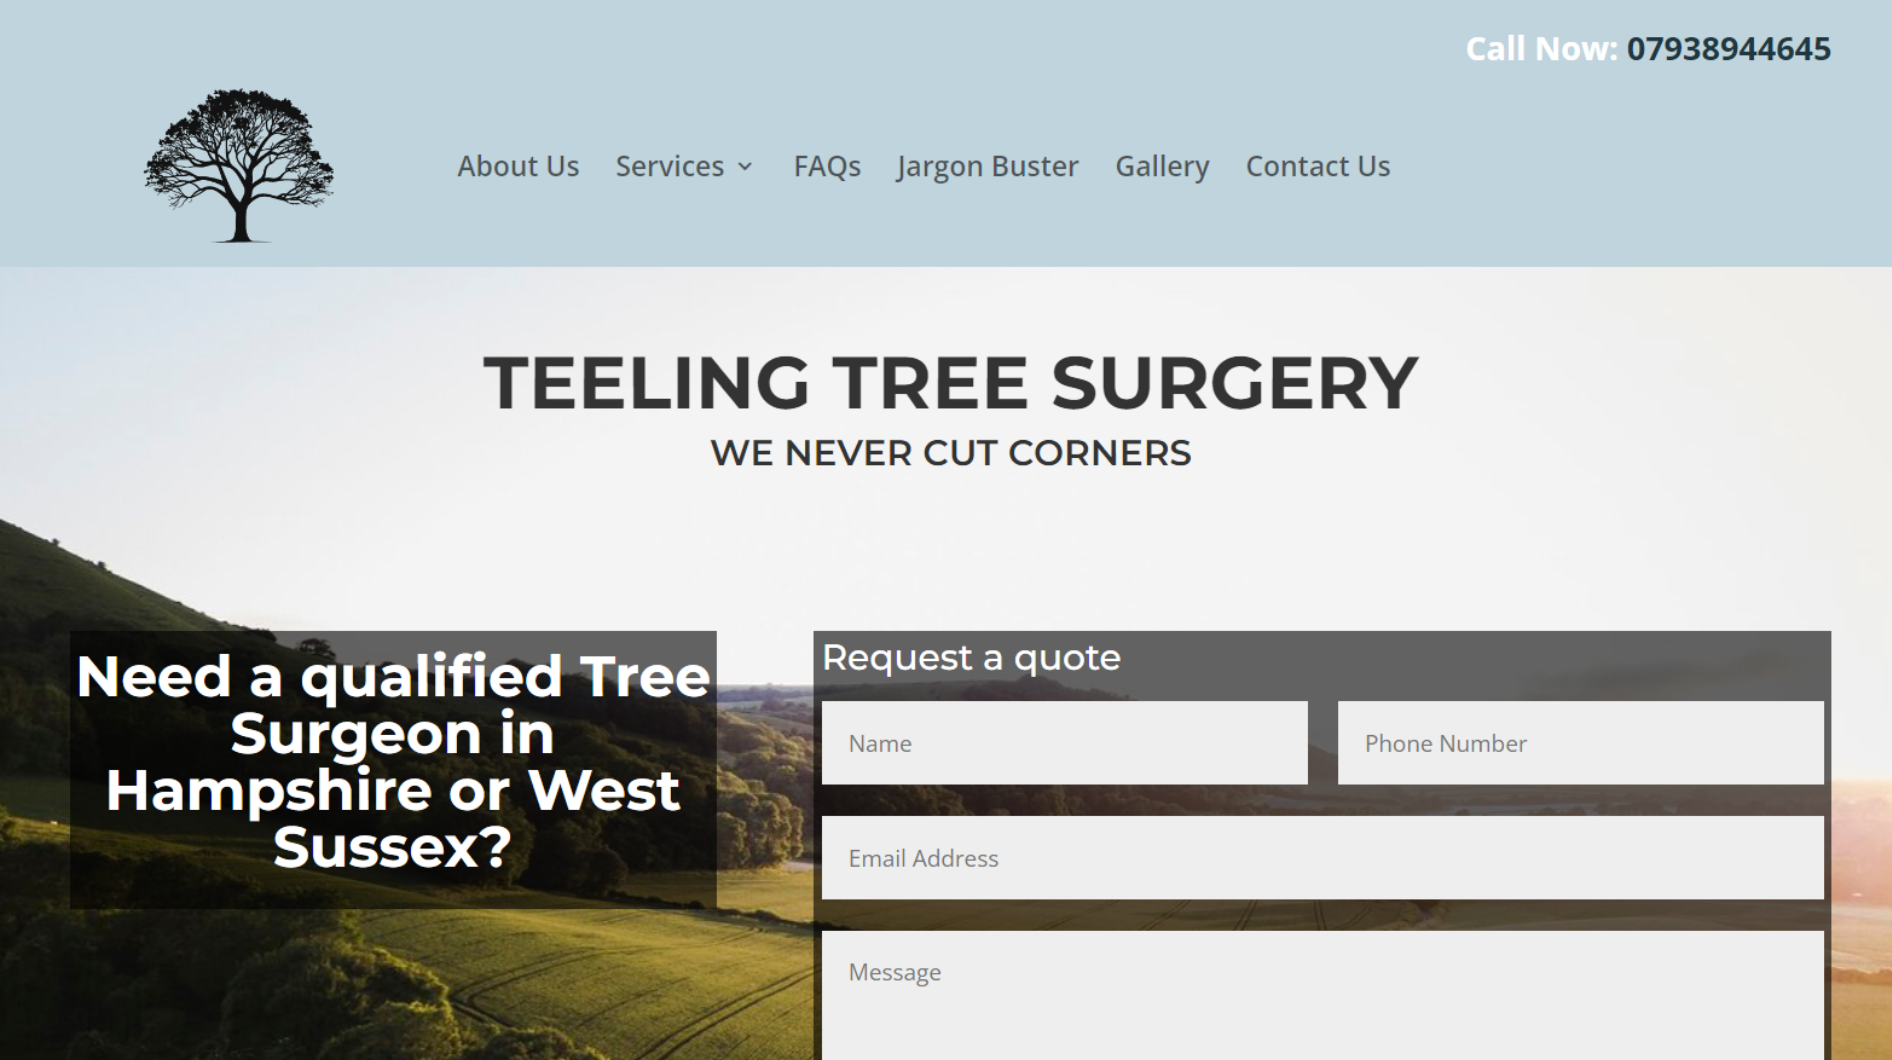 Home page design of the new Teeling Tree Surgery website. The site has a bold contact number in the top menu and a request a quote form in the header.